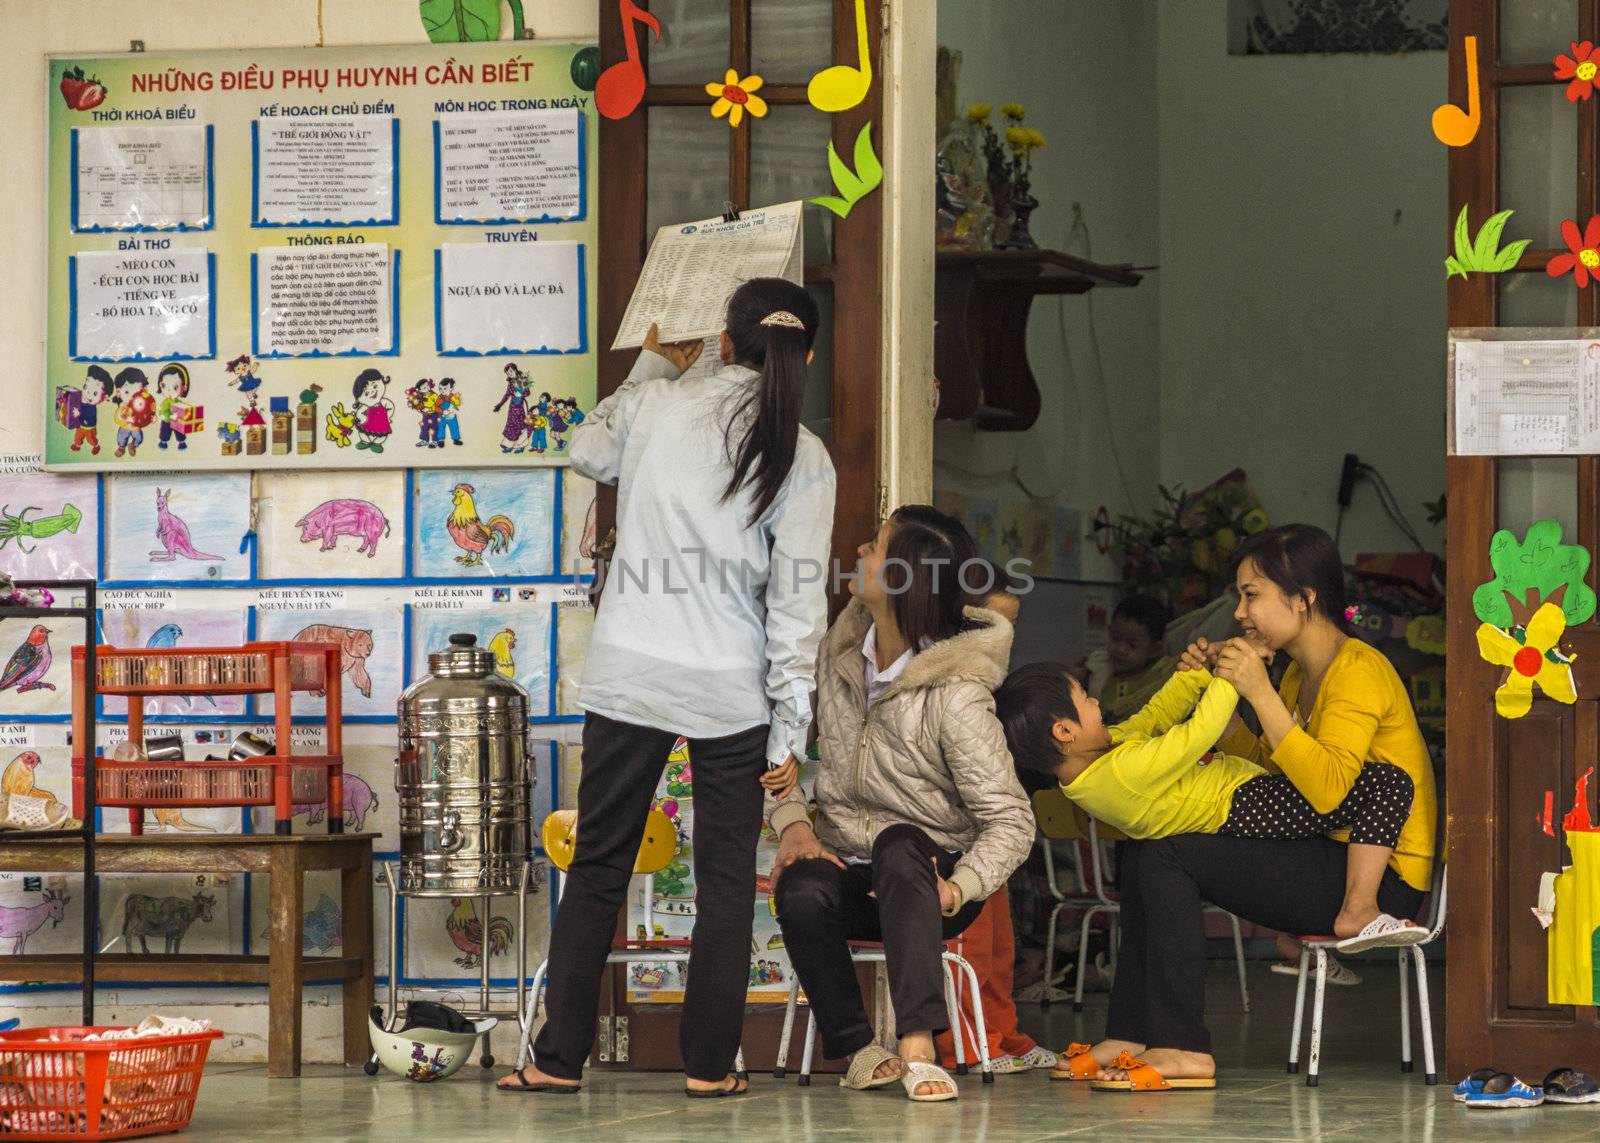 Vietnam Duong Lam. Three teachers check schedule against decor of children's drawings.